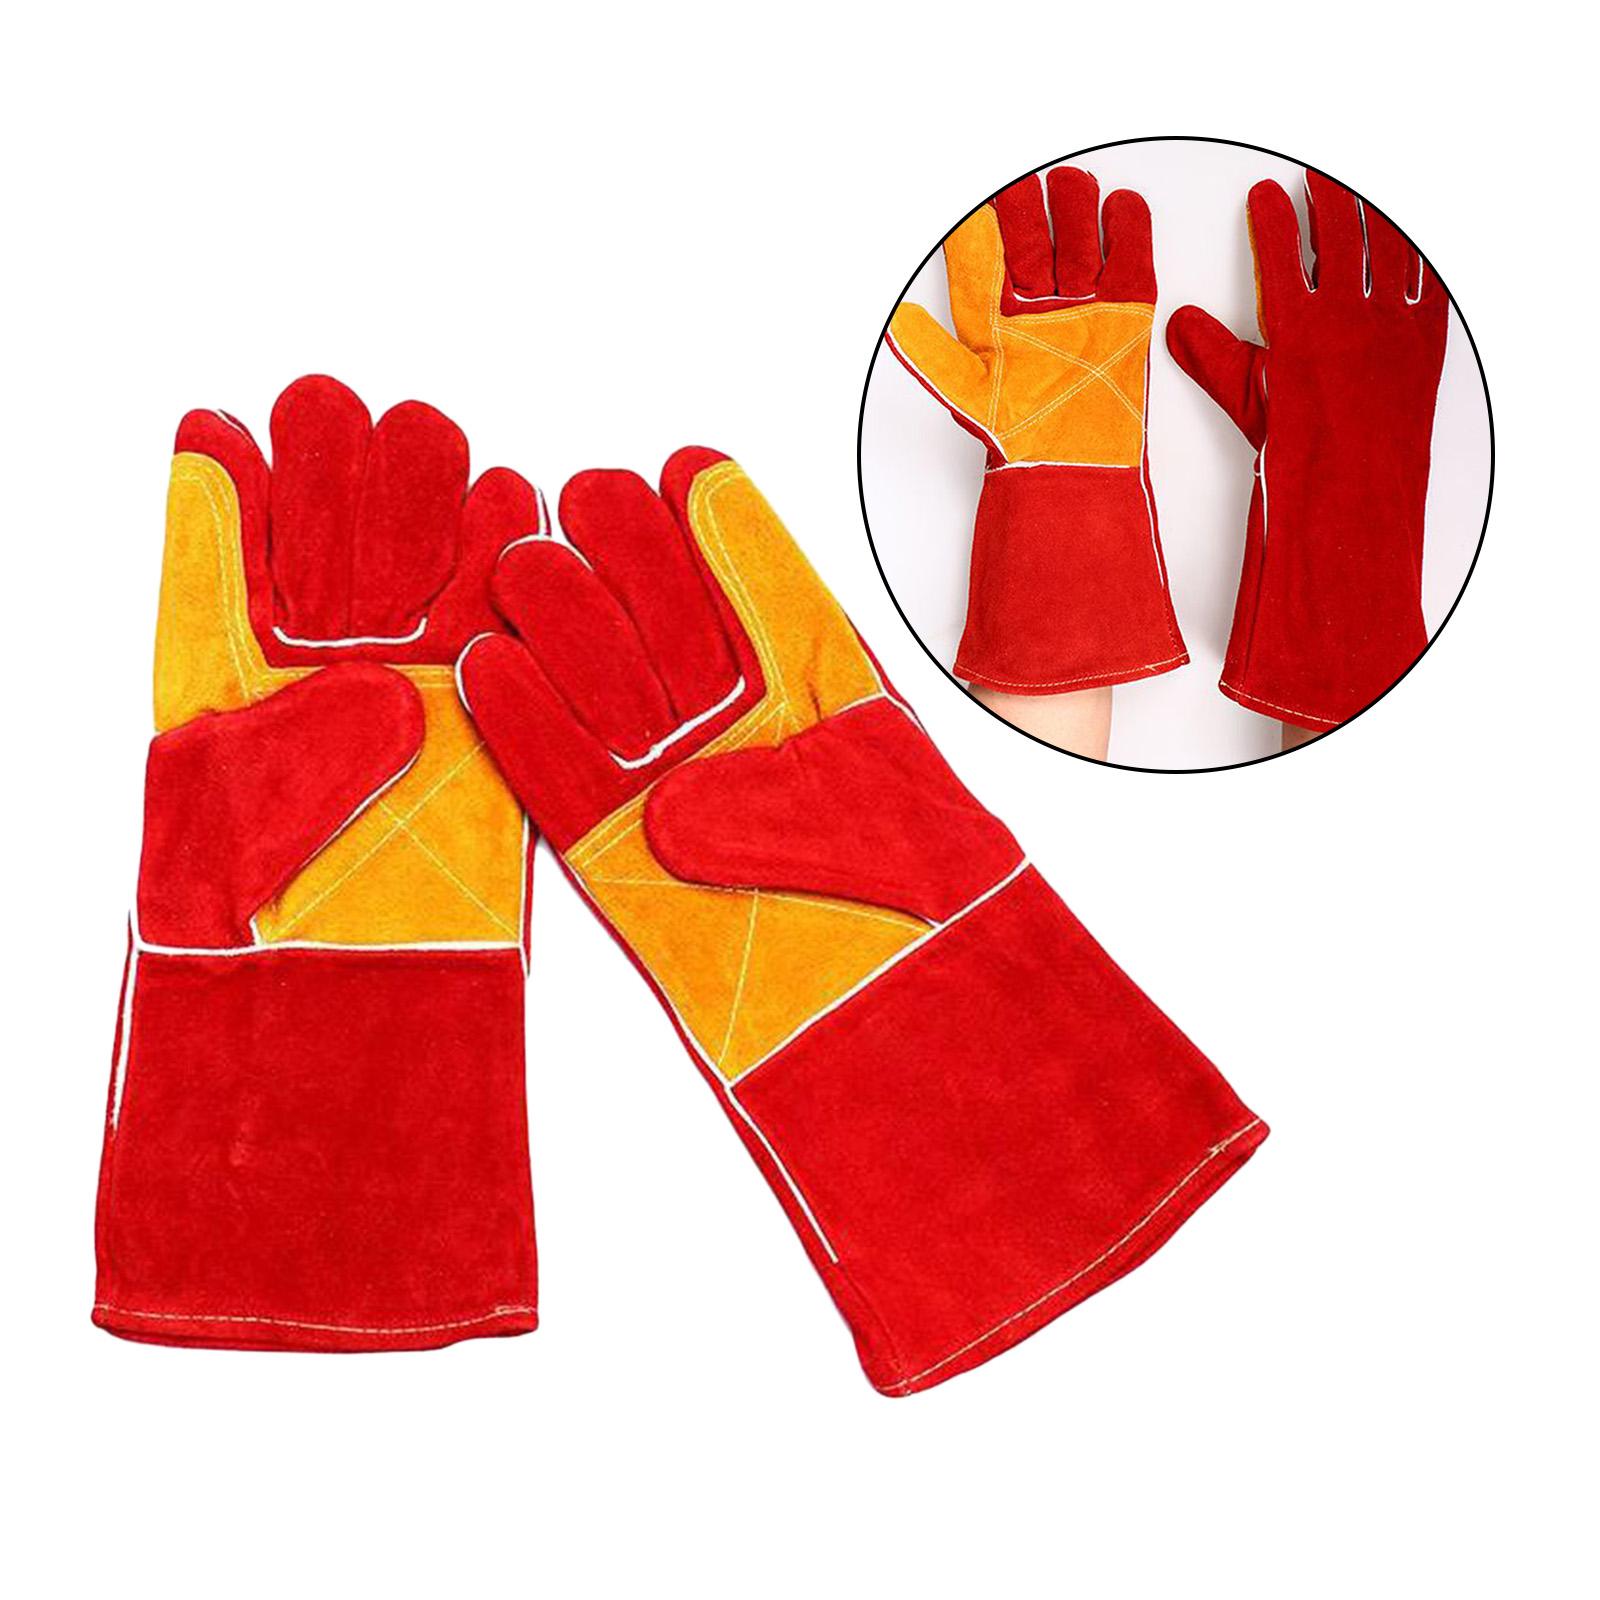 MIG Welding Gloves Cowhide Leather Wood Stoves Welder Cooking Red Yellow